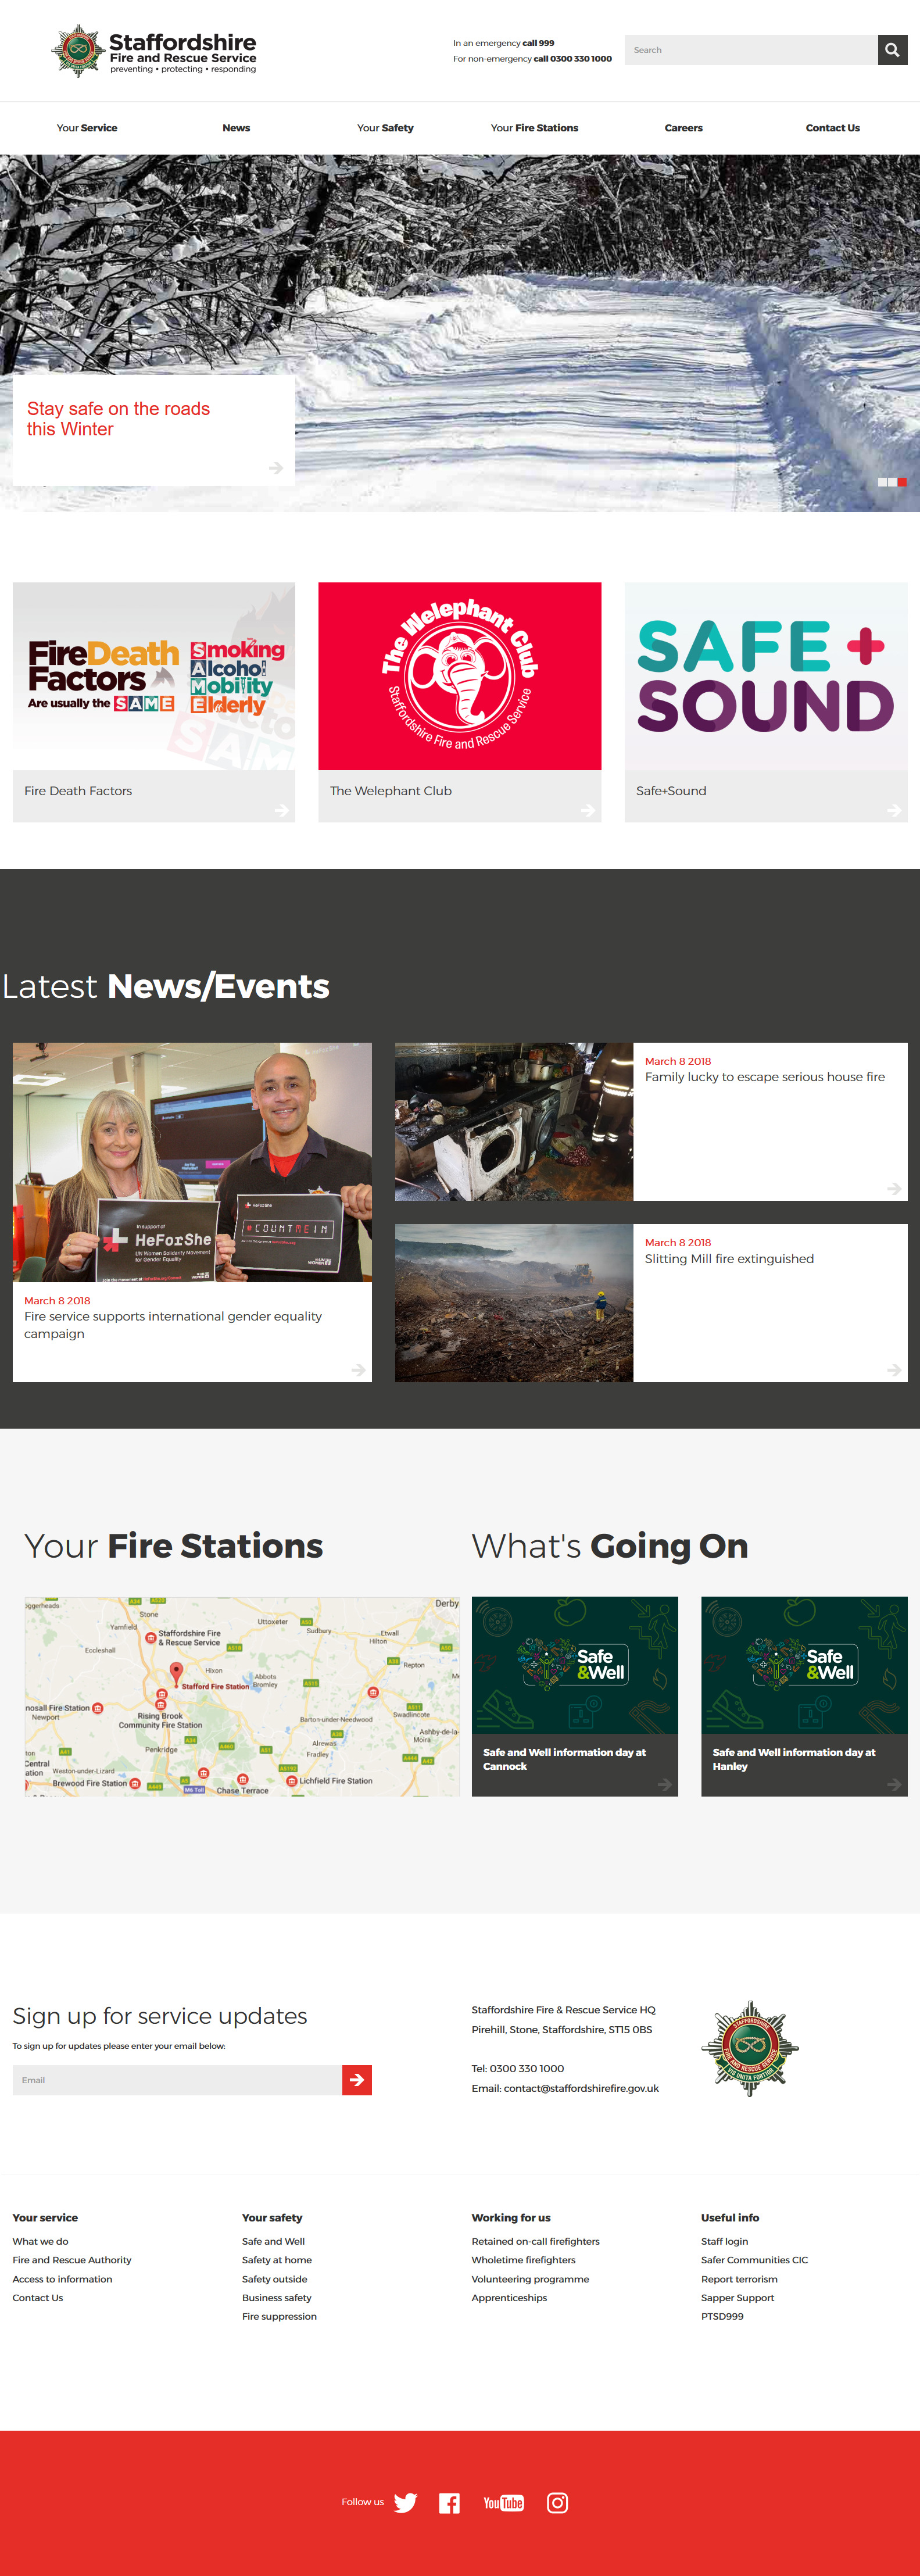 Staffordshire Fire and Rescue website